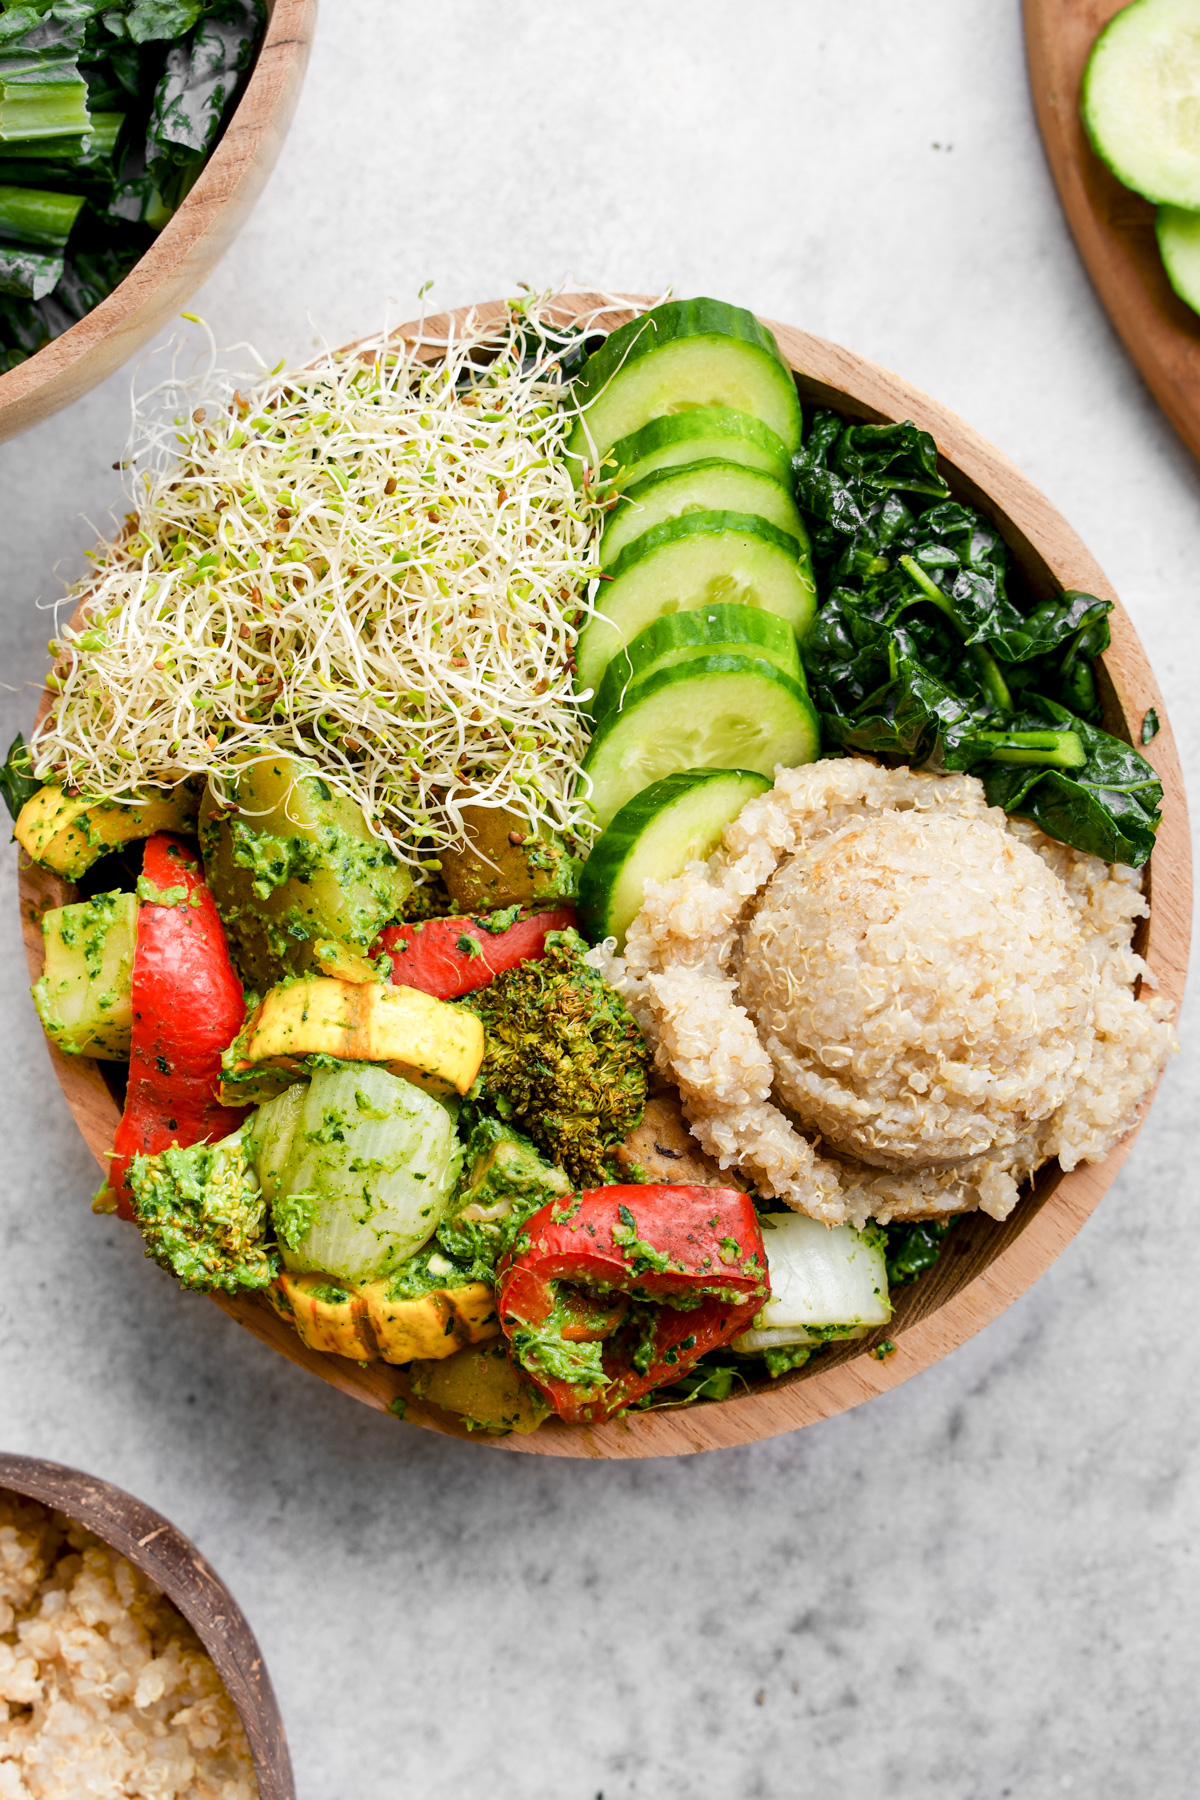 looking down at the pesto buddha bowl made up of roasted vegetables, kale, quinoa, sprouts, and cucumbers